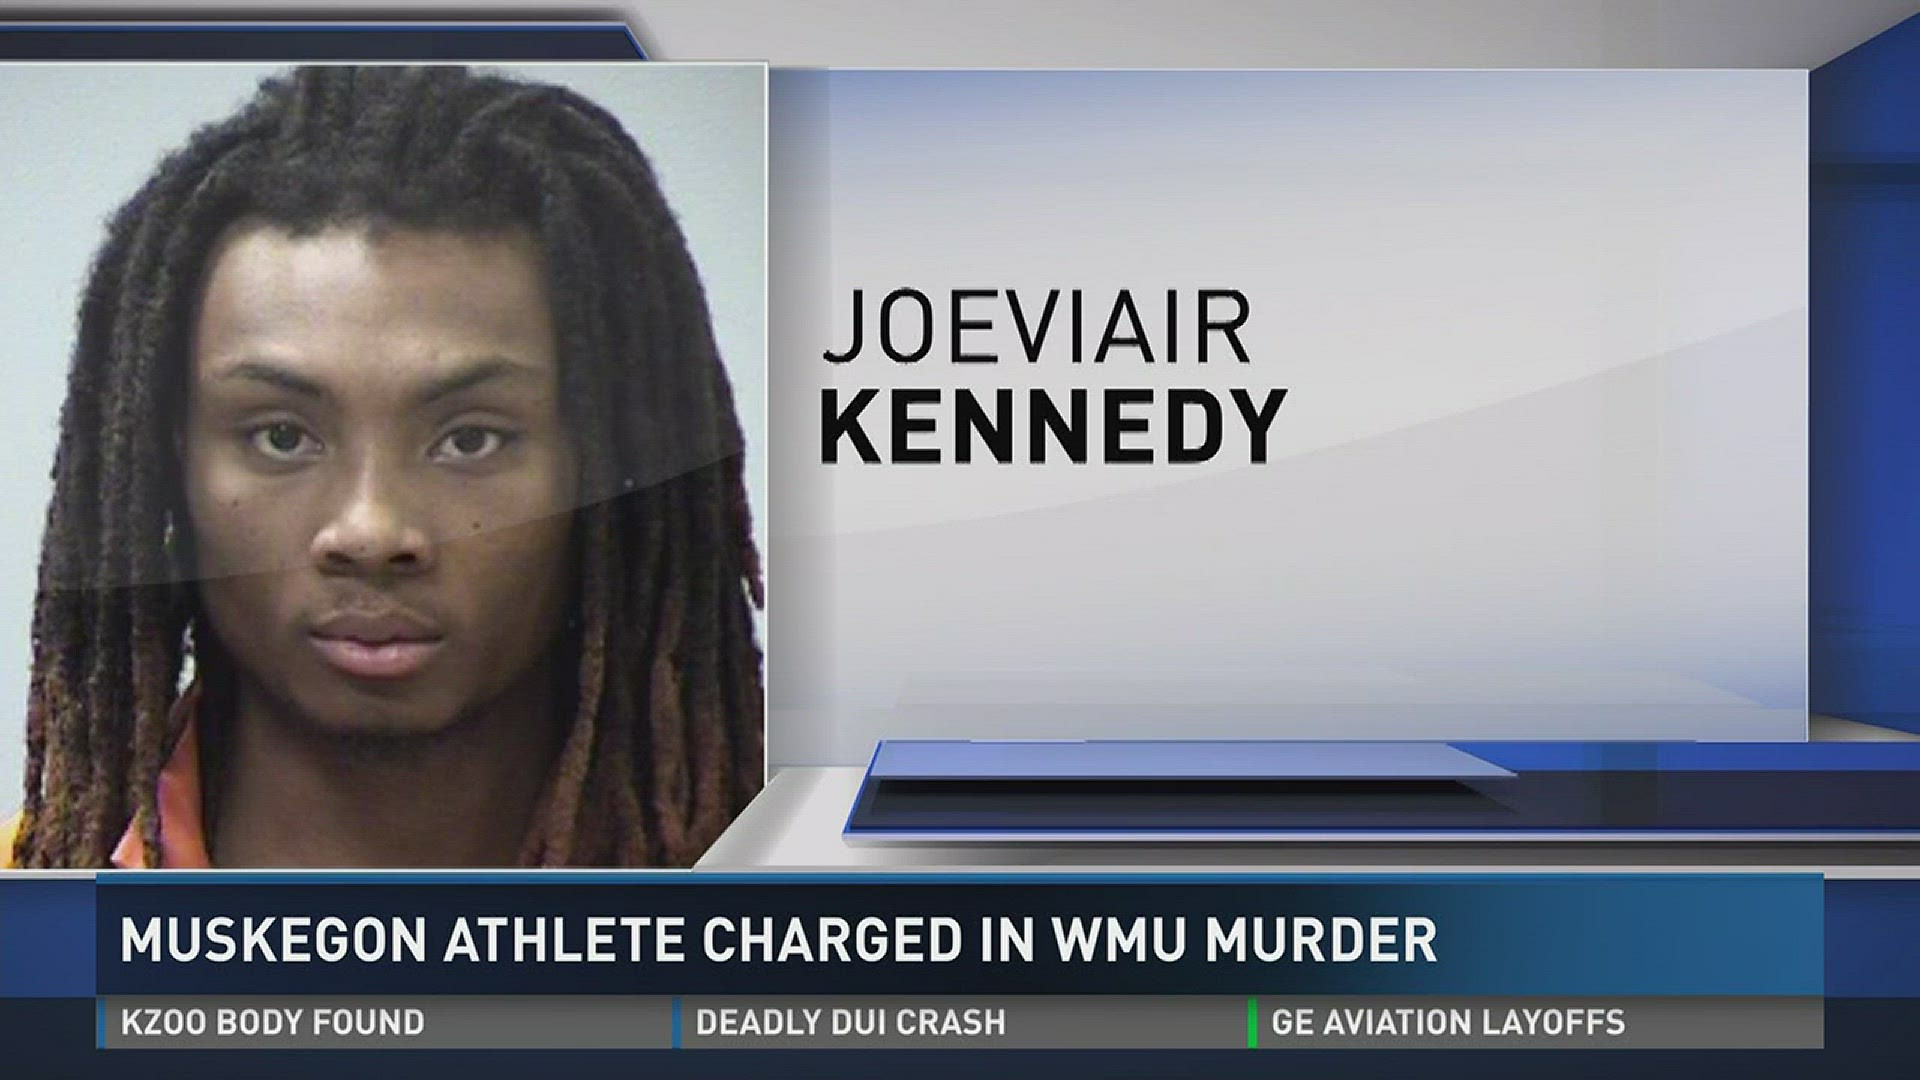 Muskegon athlete charged in WMU murder